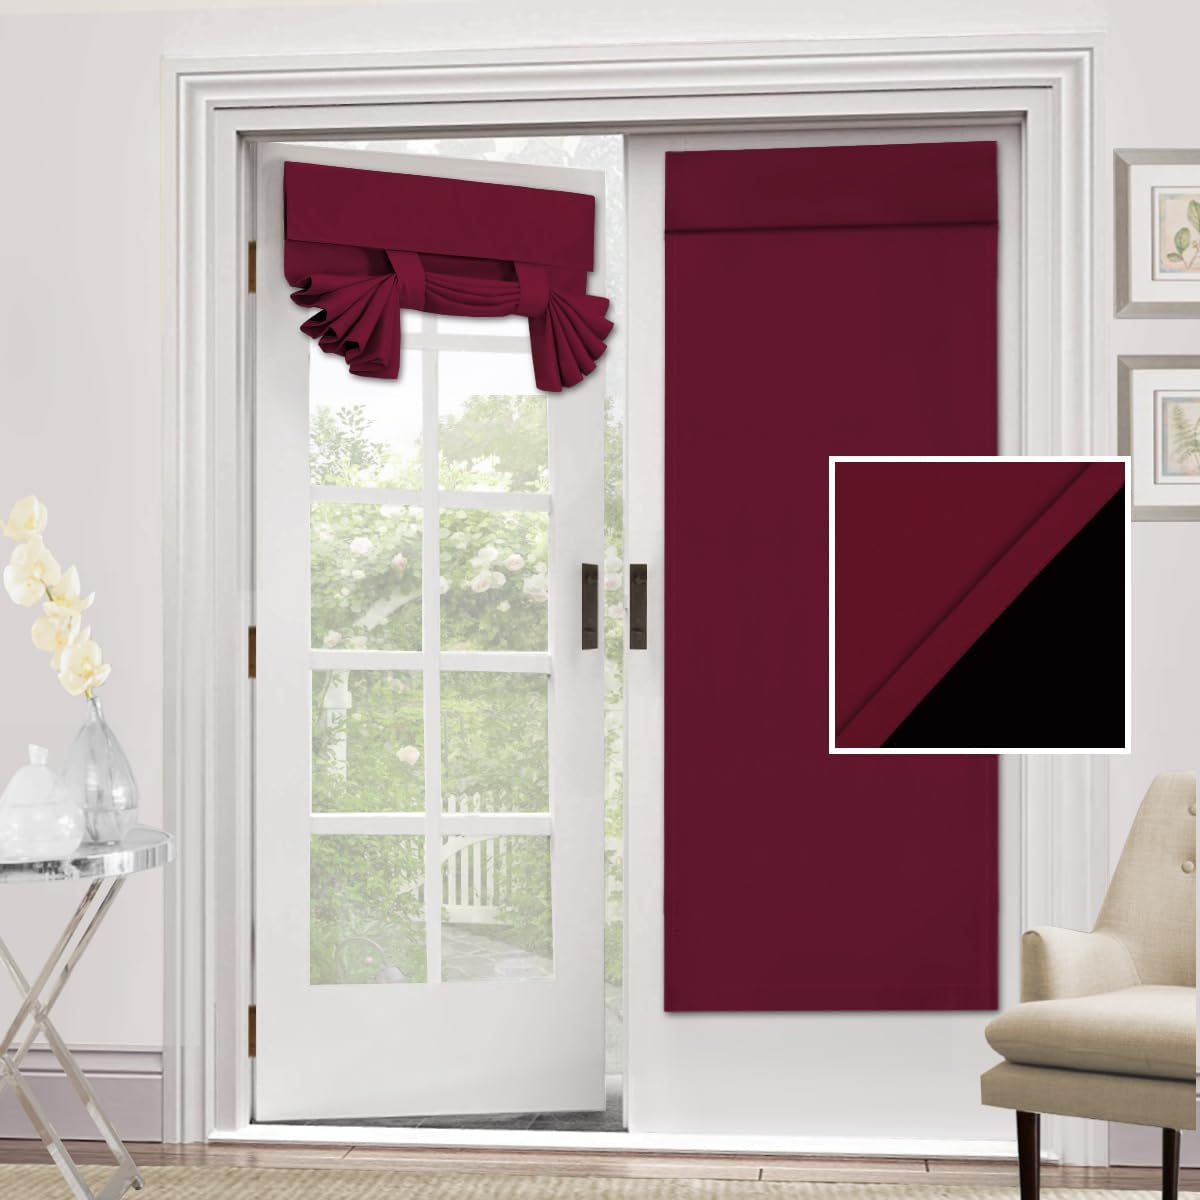 H.VERSAILTEX 100% Blackout Door Curtain - Small French Door Curtains for Doors Window, Thermal Insulated Adhesive Tricia Door Curtain, 26X40 Inches, 1 Panel, Pumice Stone  H.VERSAILTEX Burgundy 26"W X 68"L 